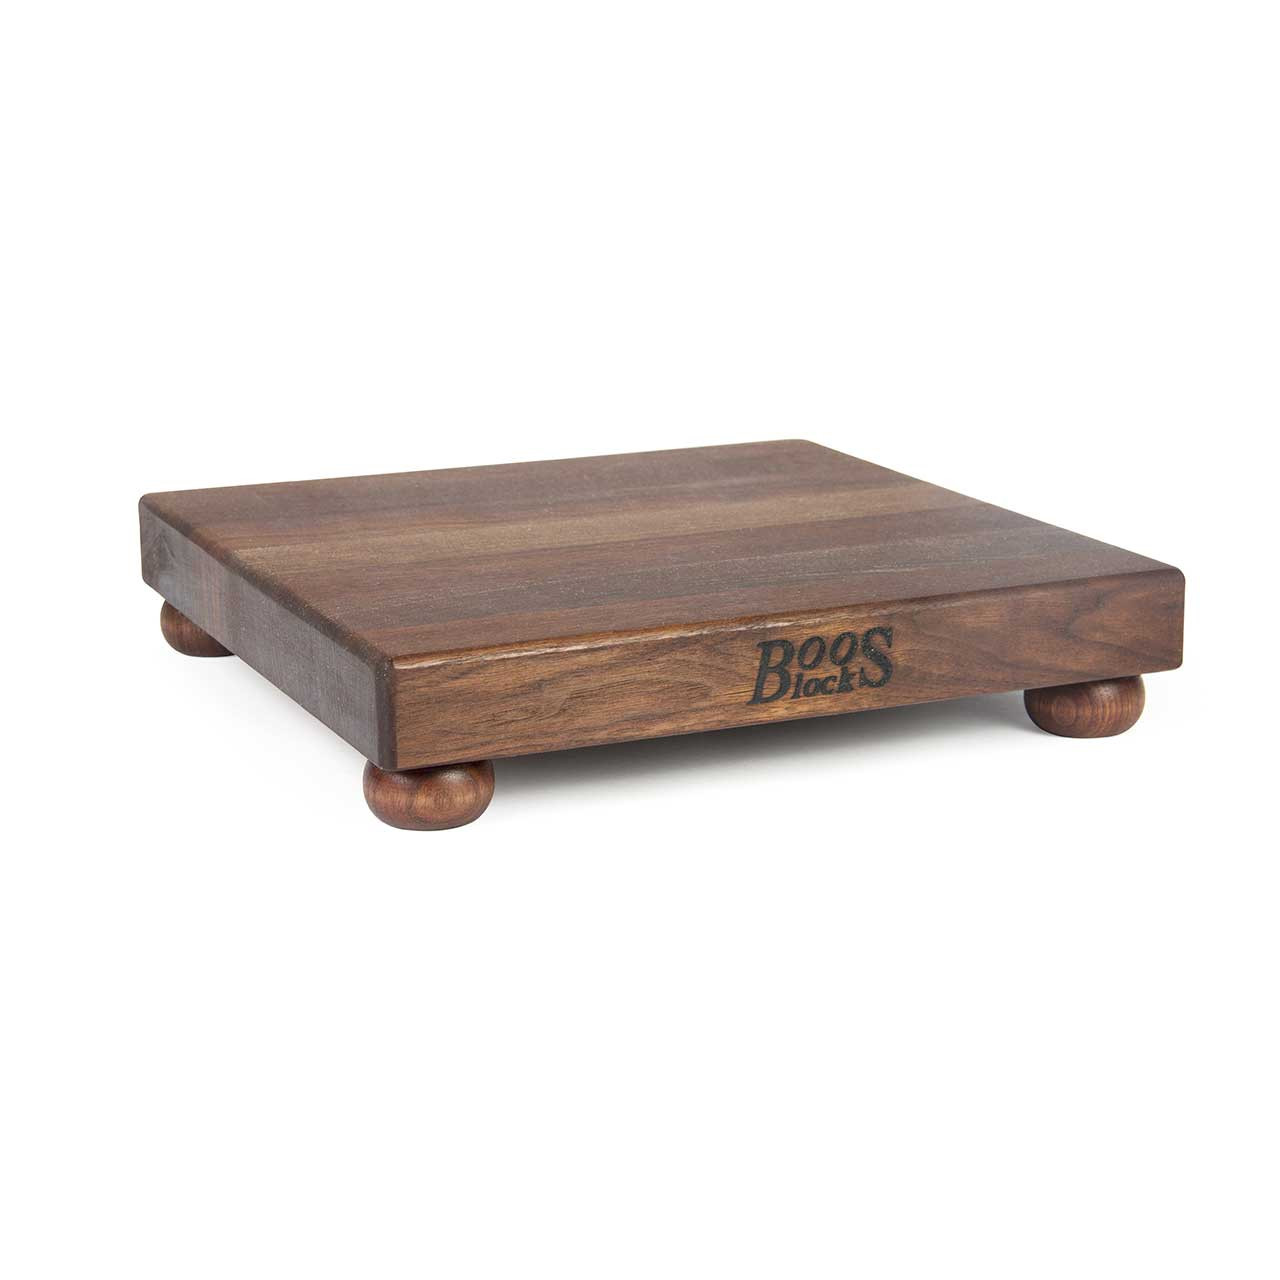 Coolina Walnut Serving Board - Perfect Cutting Board for Chopping  Meet,Chicken! Made from Durable Walnut Wood (12x9 inches)